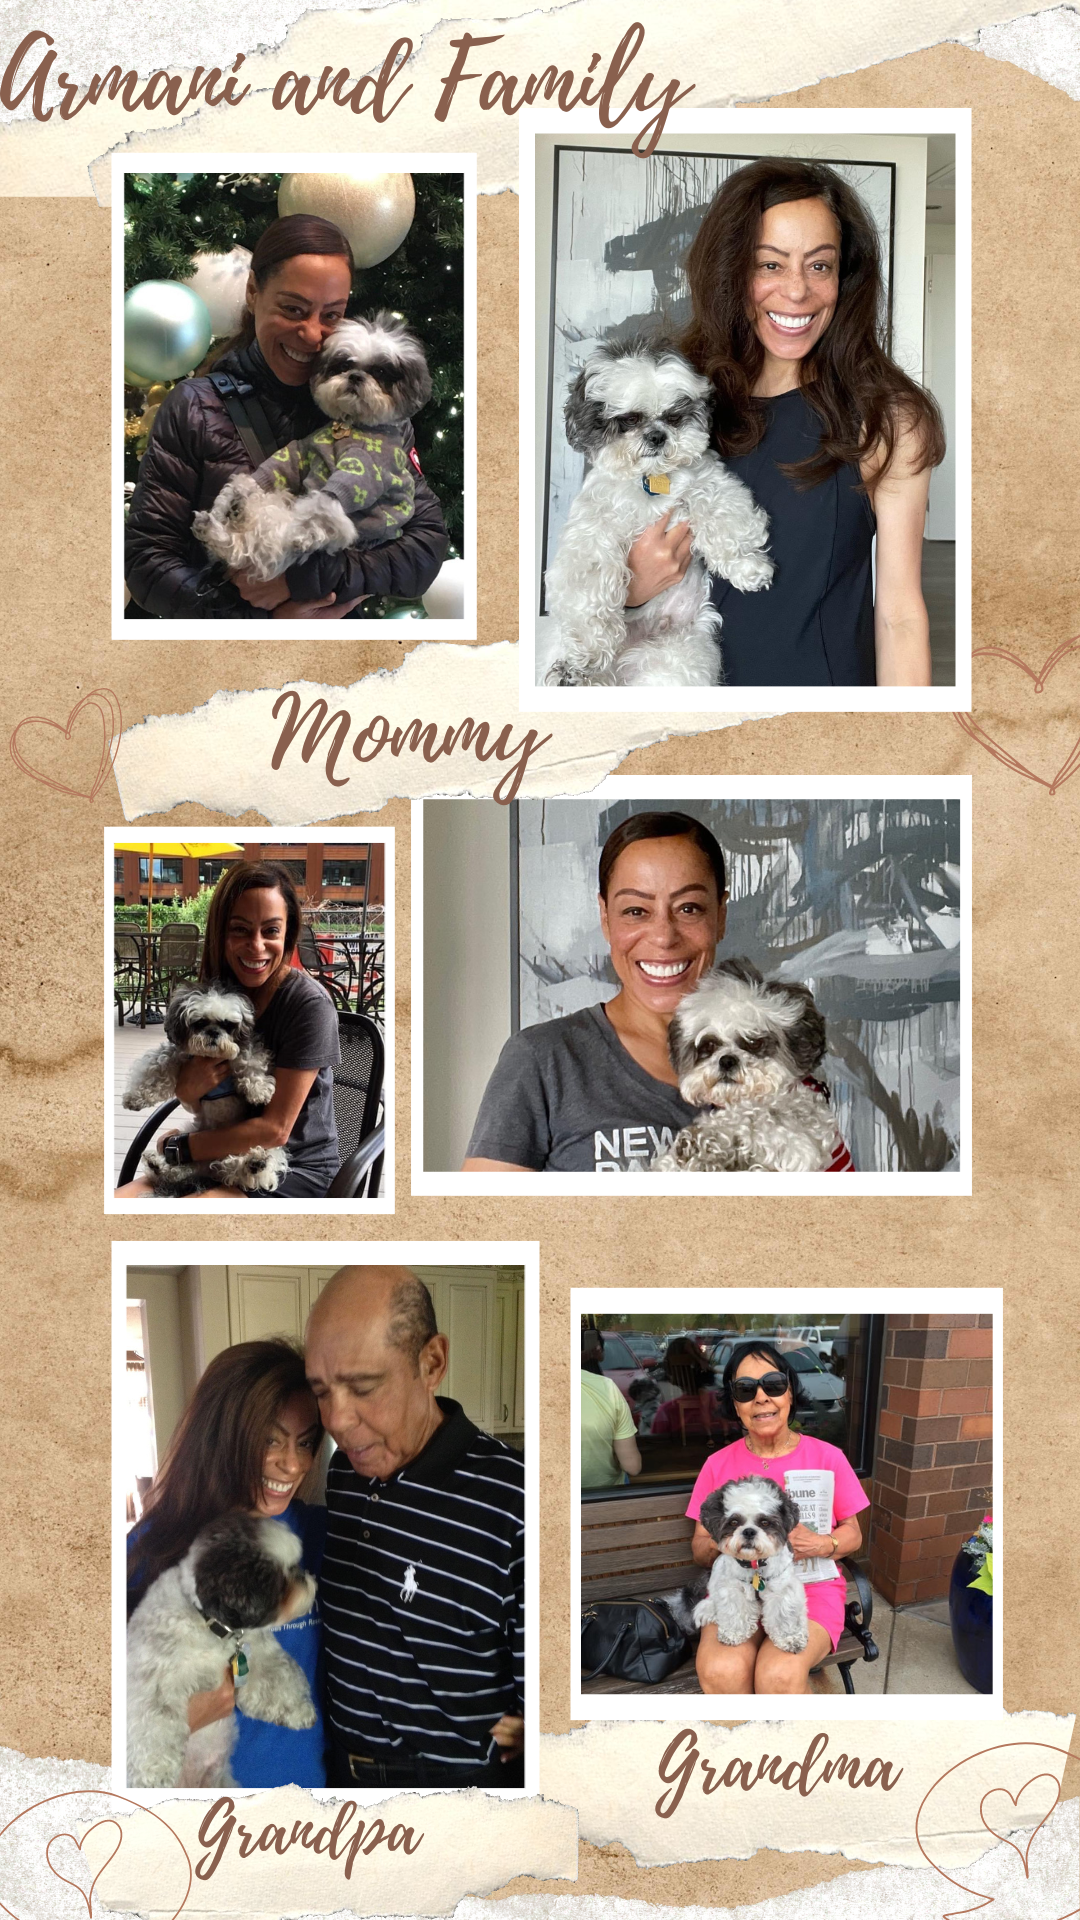 White and Grey "Teddy bear puppy" Collage. Pictures are of Armani and mom, grandma and grandpa